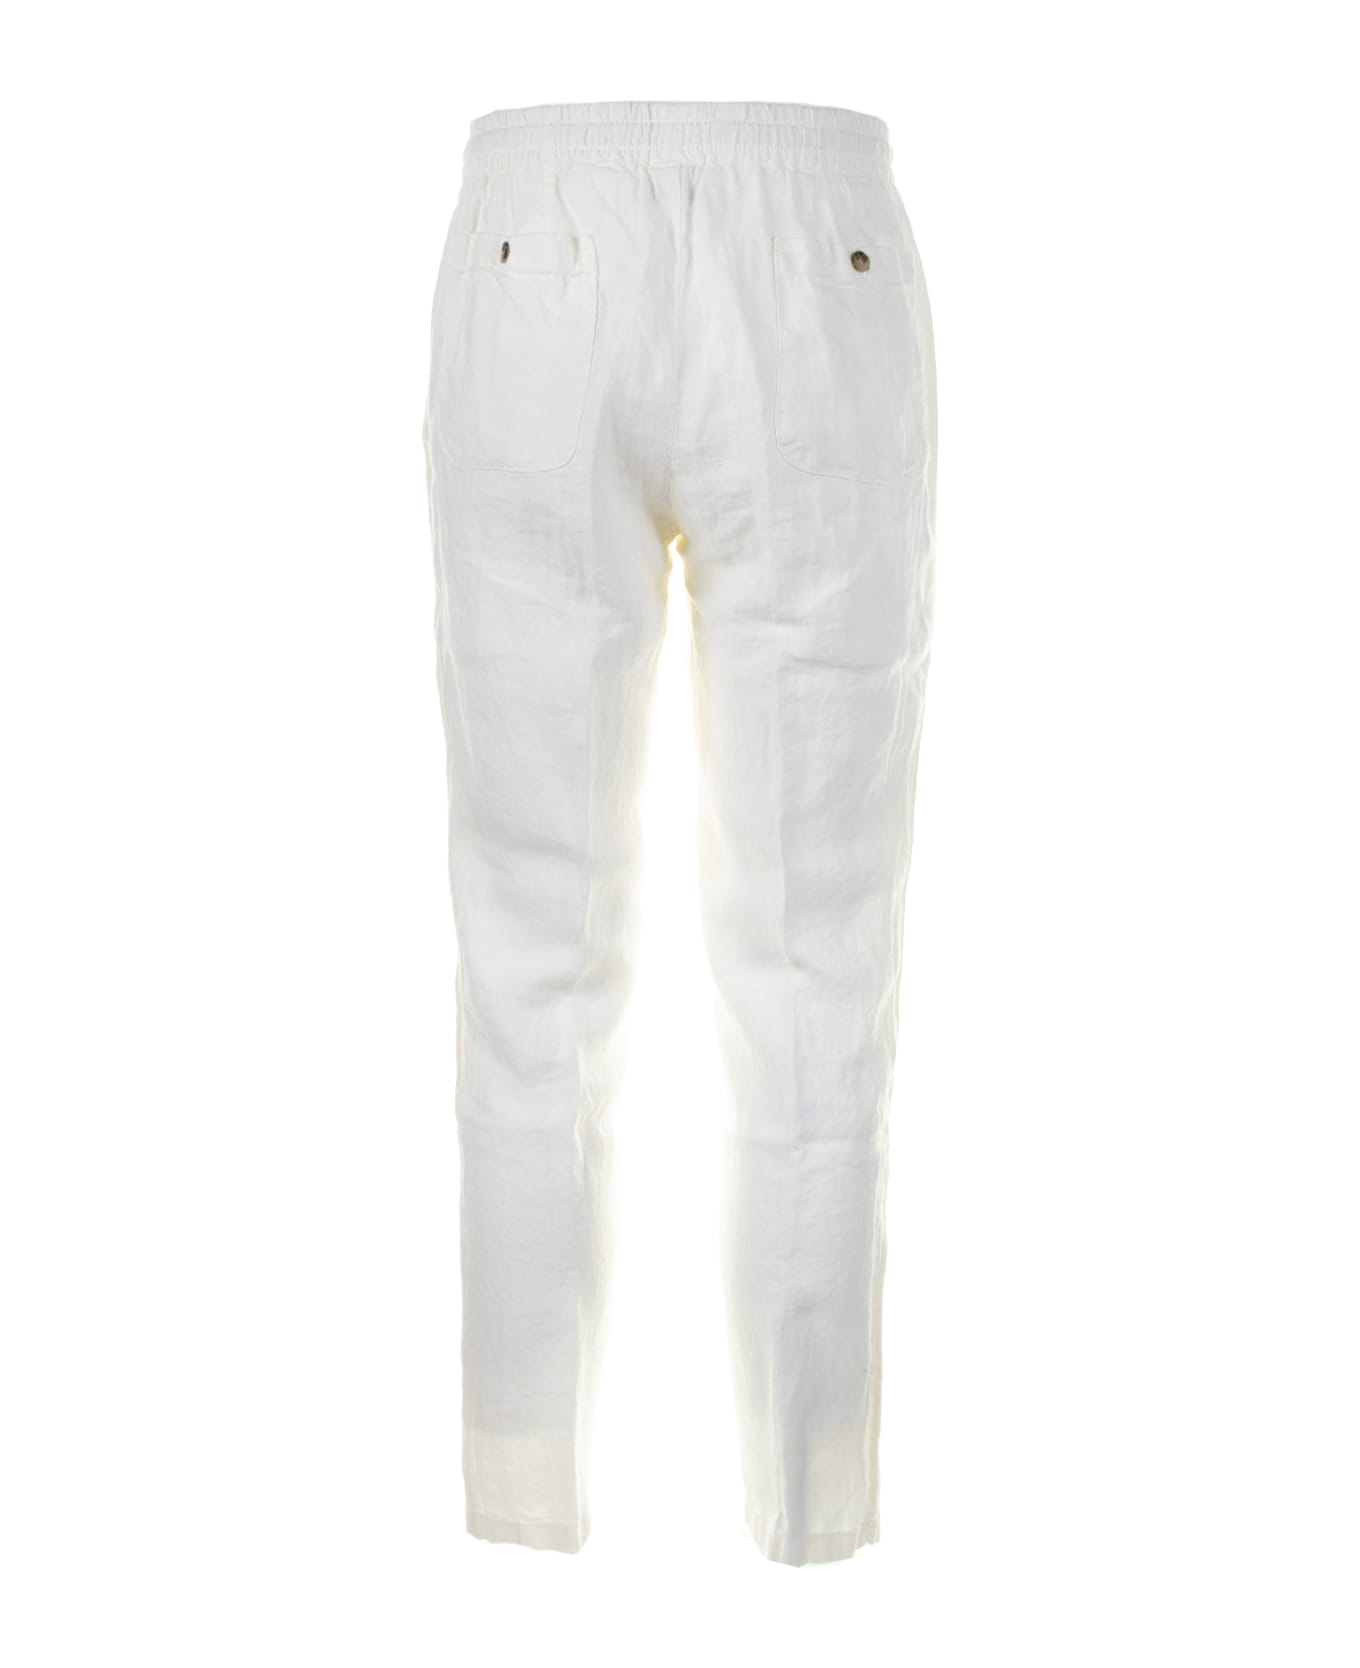 Altea White Linen Trousers With Drawstring - BIANCO ボトムス